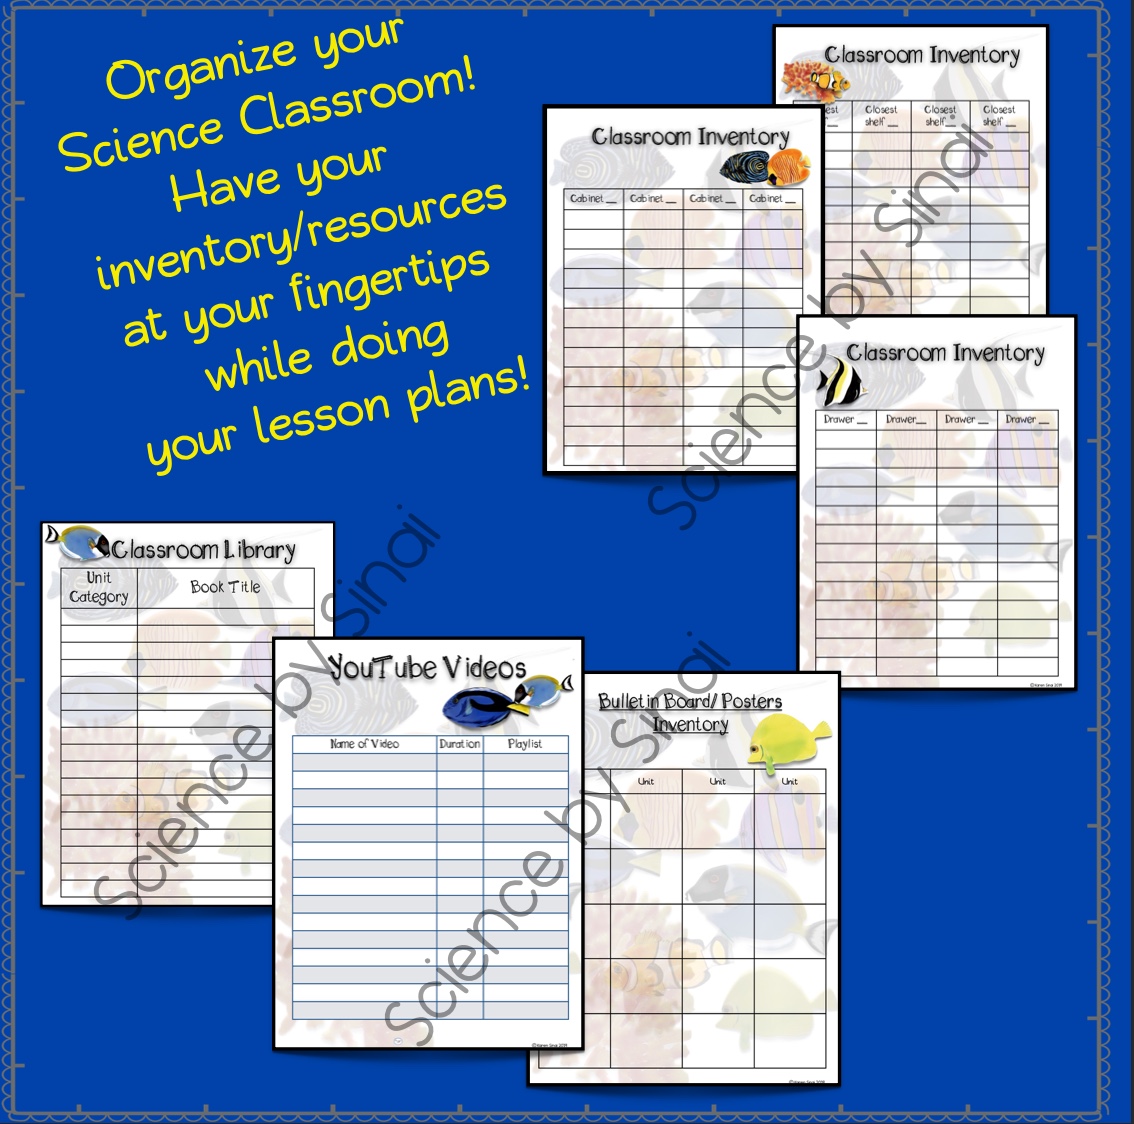 Classroom inventory forms